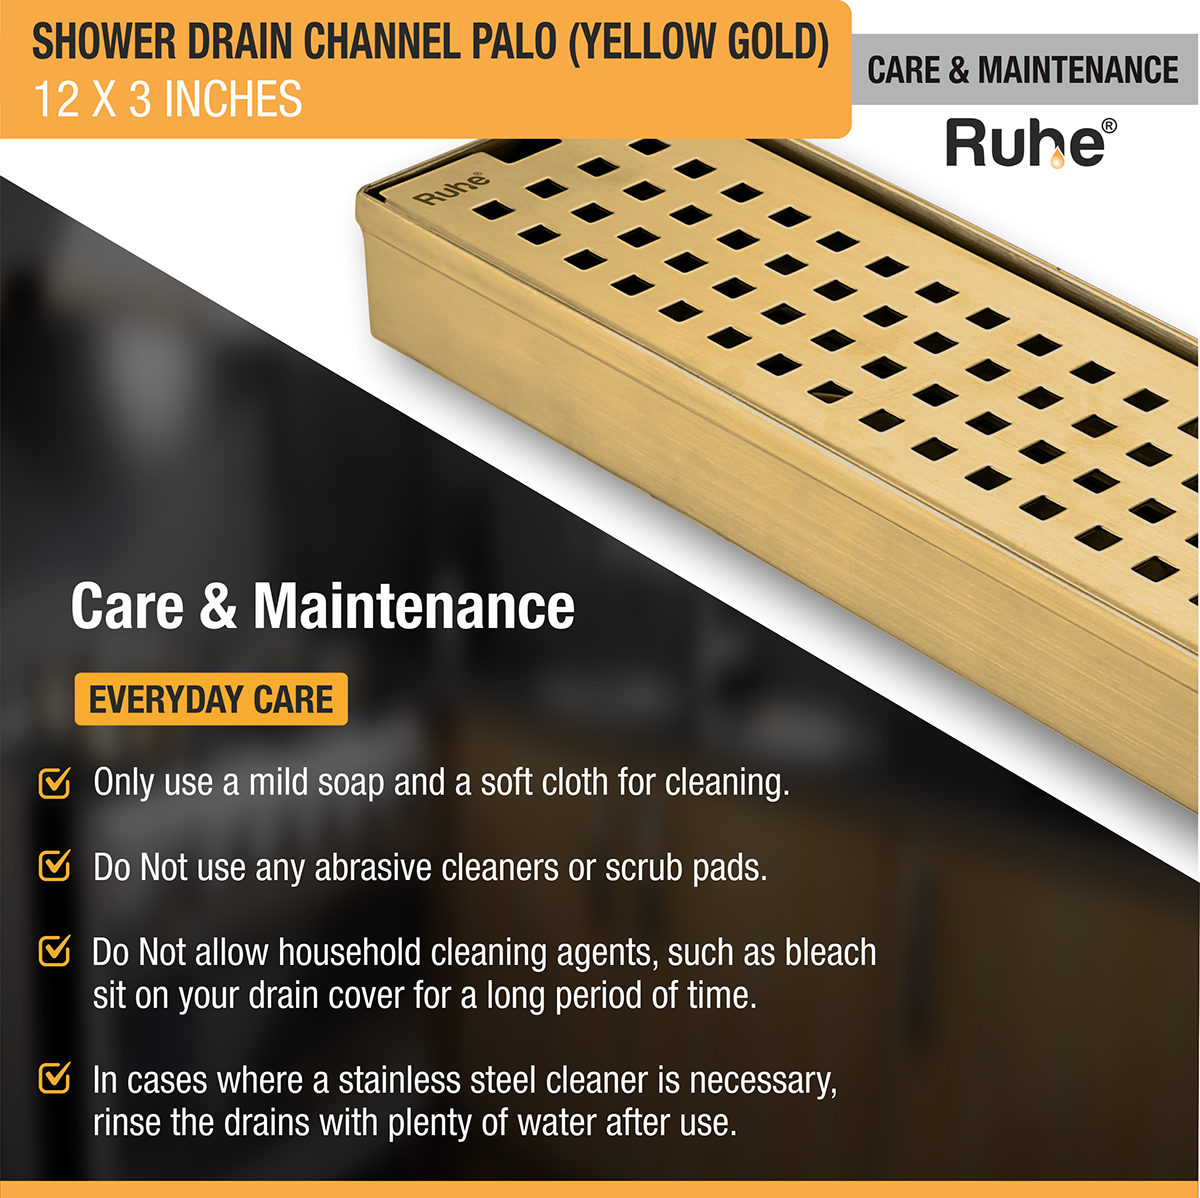 Palo Shower Drain Channel (12 x 3 Inches) YELLOW GOLD care and maintenance